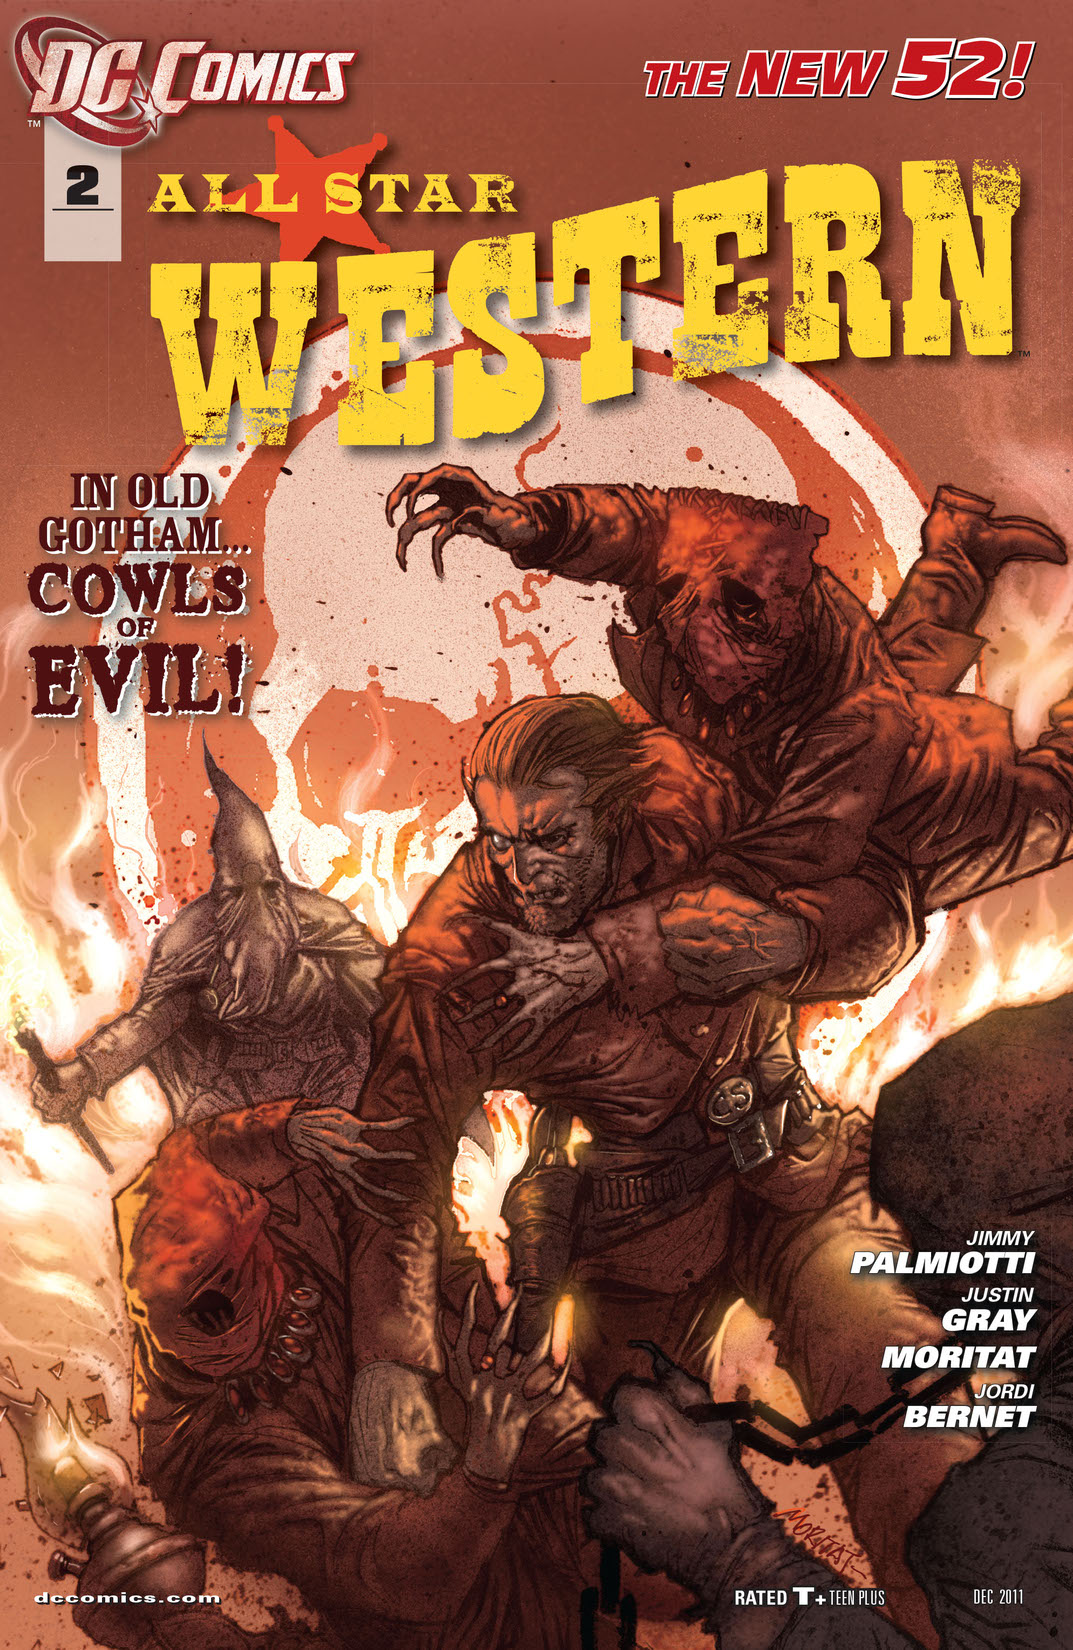 All Star Western #2 preview images